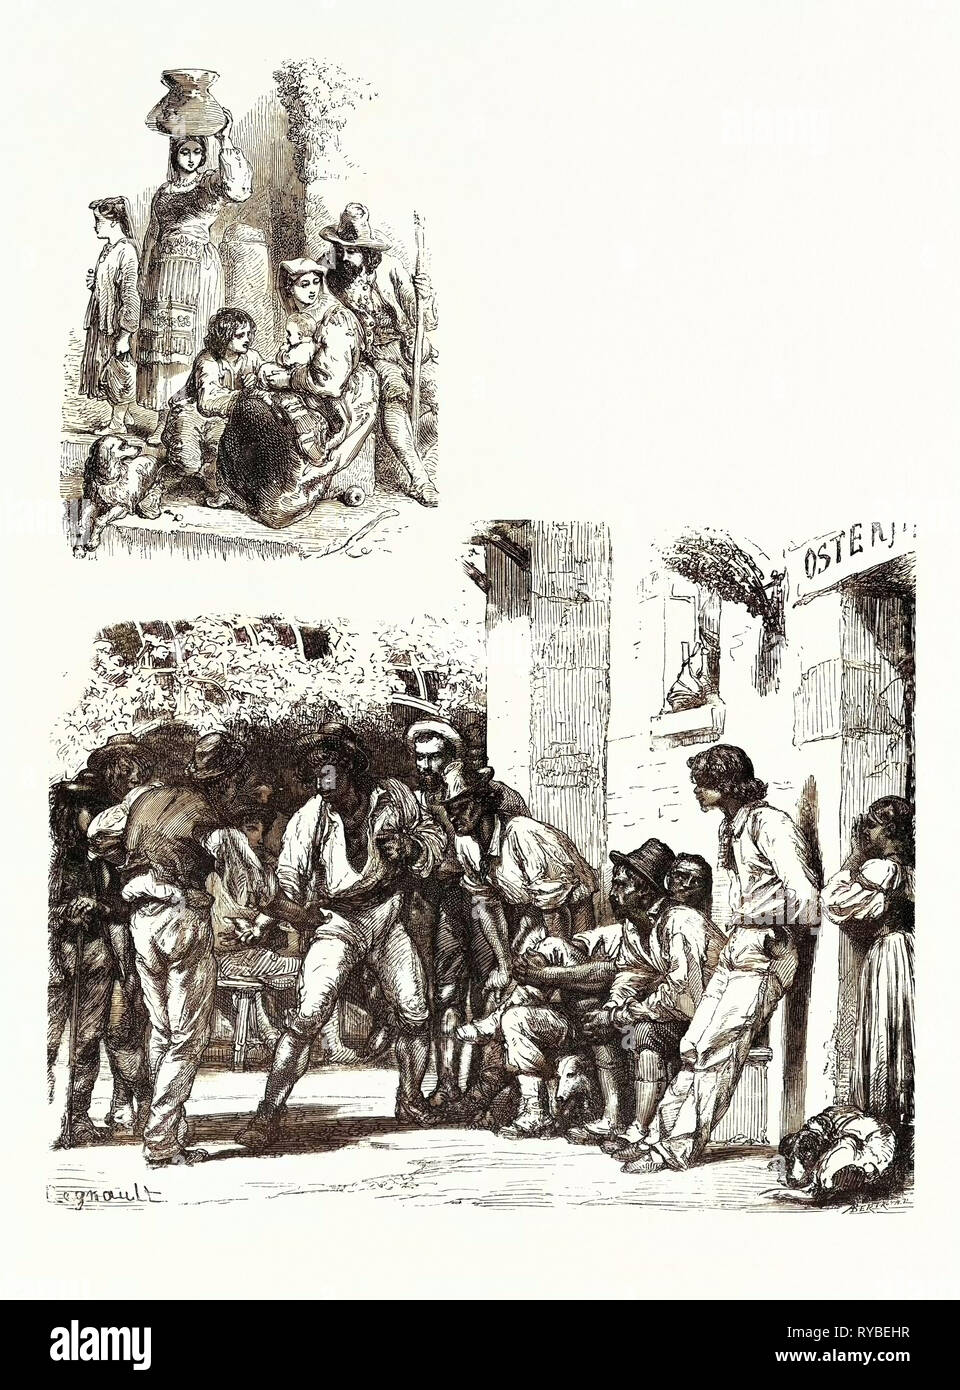 Roman Peasants: The Ideal (Upper Image) Roman Peasants Playing at Mora: The Reality (Lower Image Stock Photo